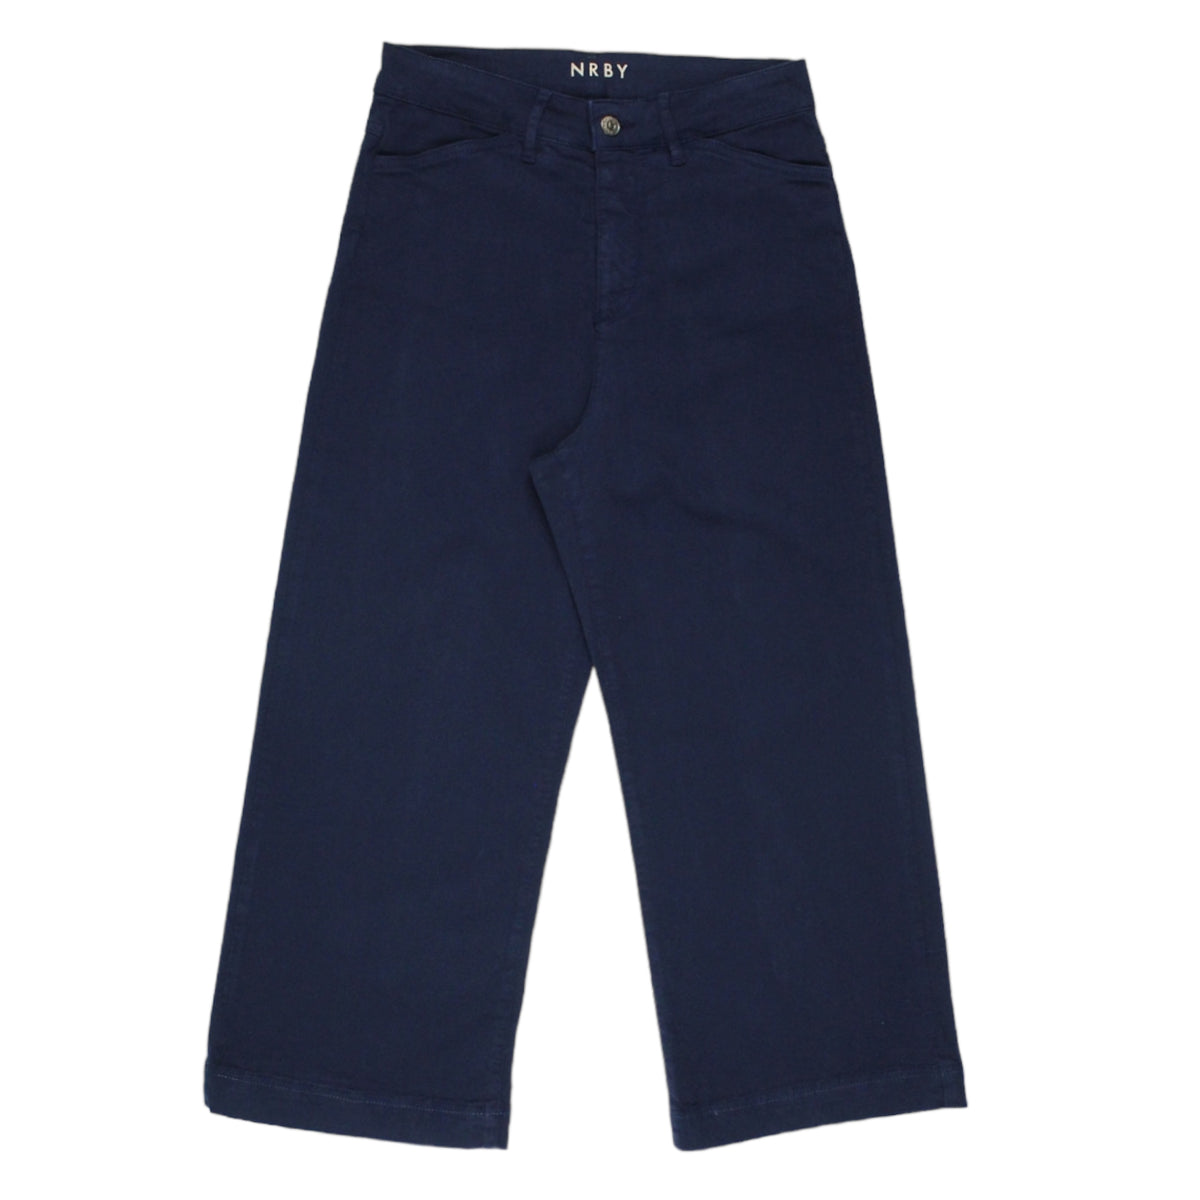 NRBY Navy Cropped Chino's - Sample